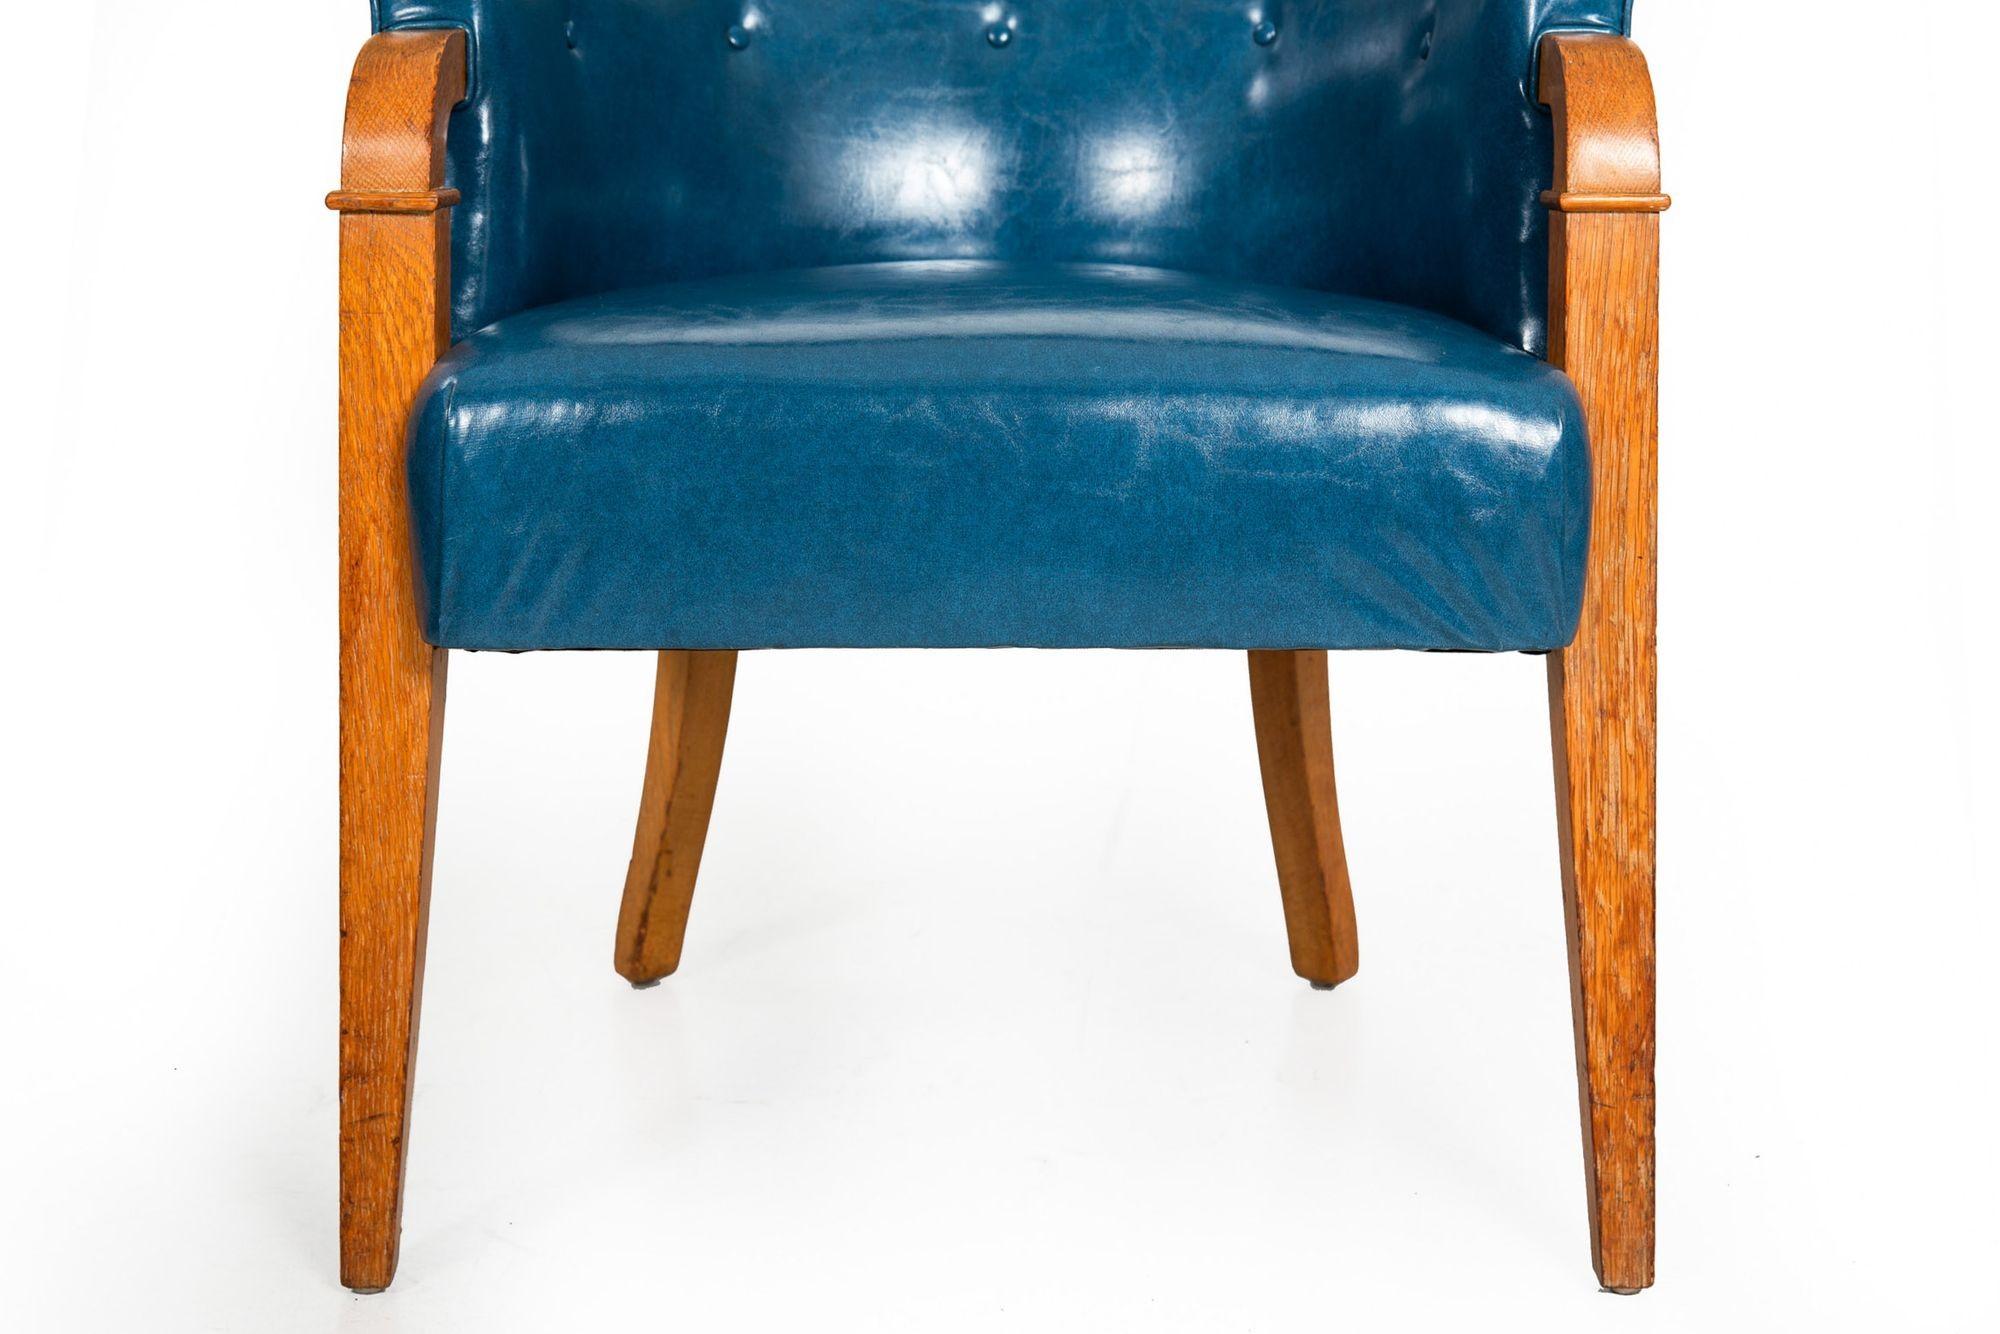 Mid-Century Modernist White Oak Tub Arm Chair in Blue Faux-Leather For Sale 3